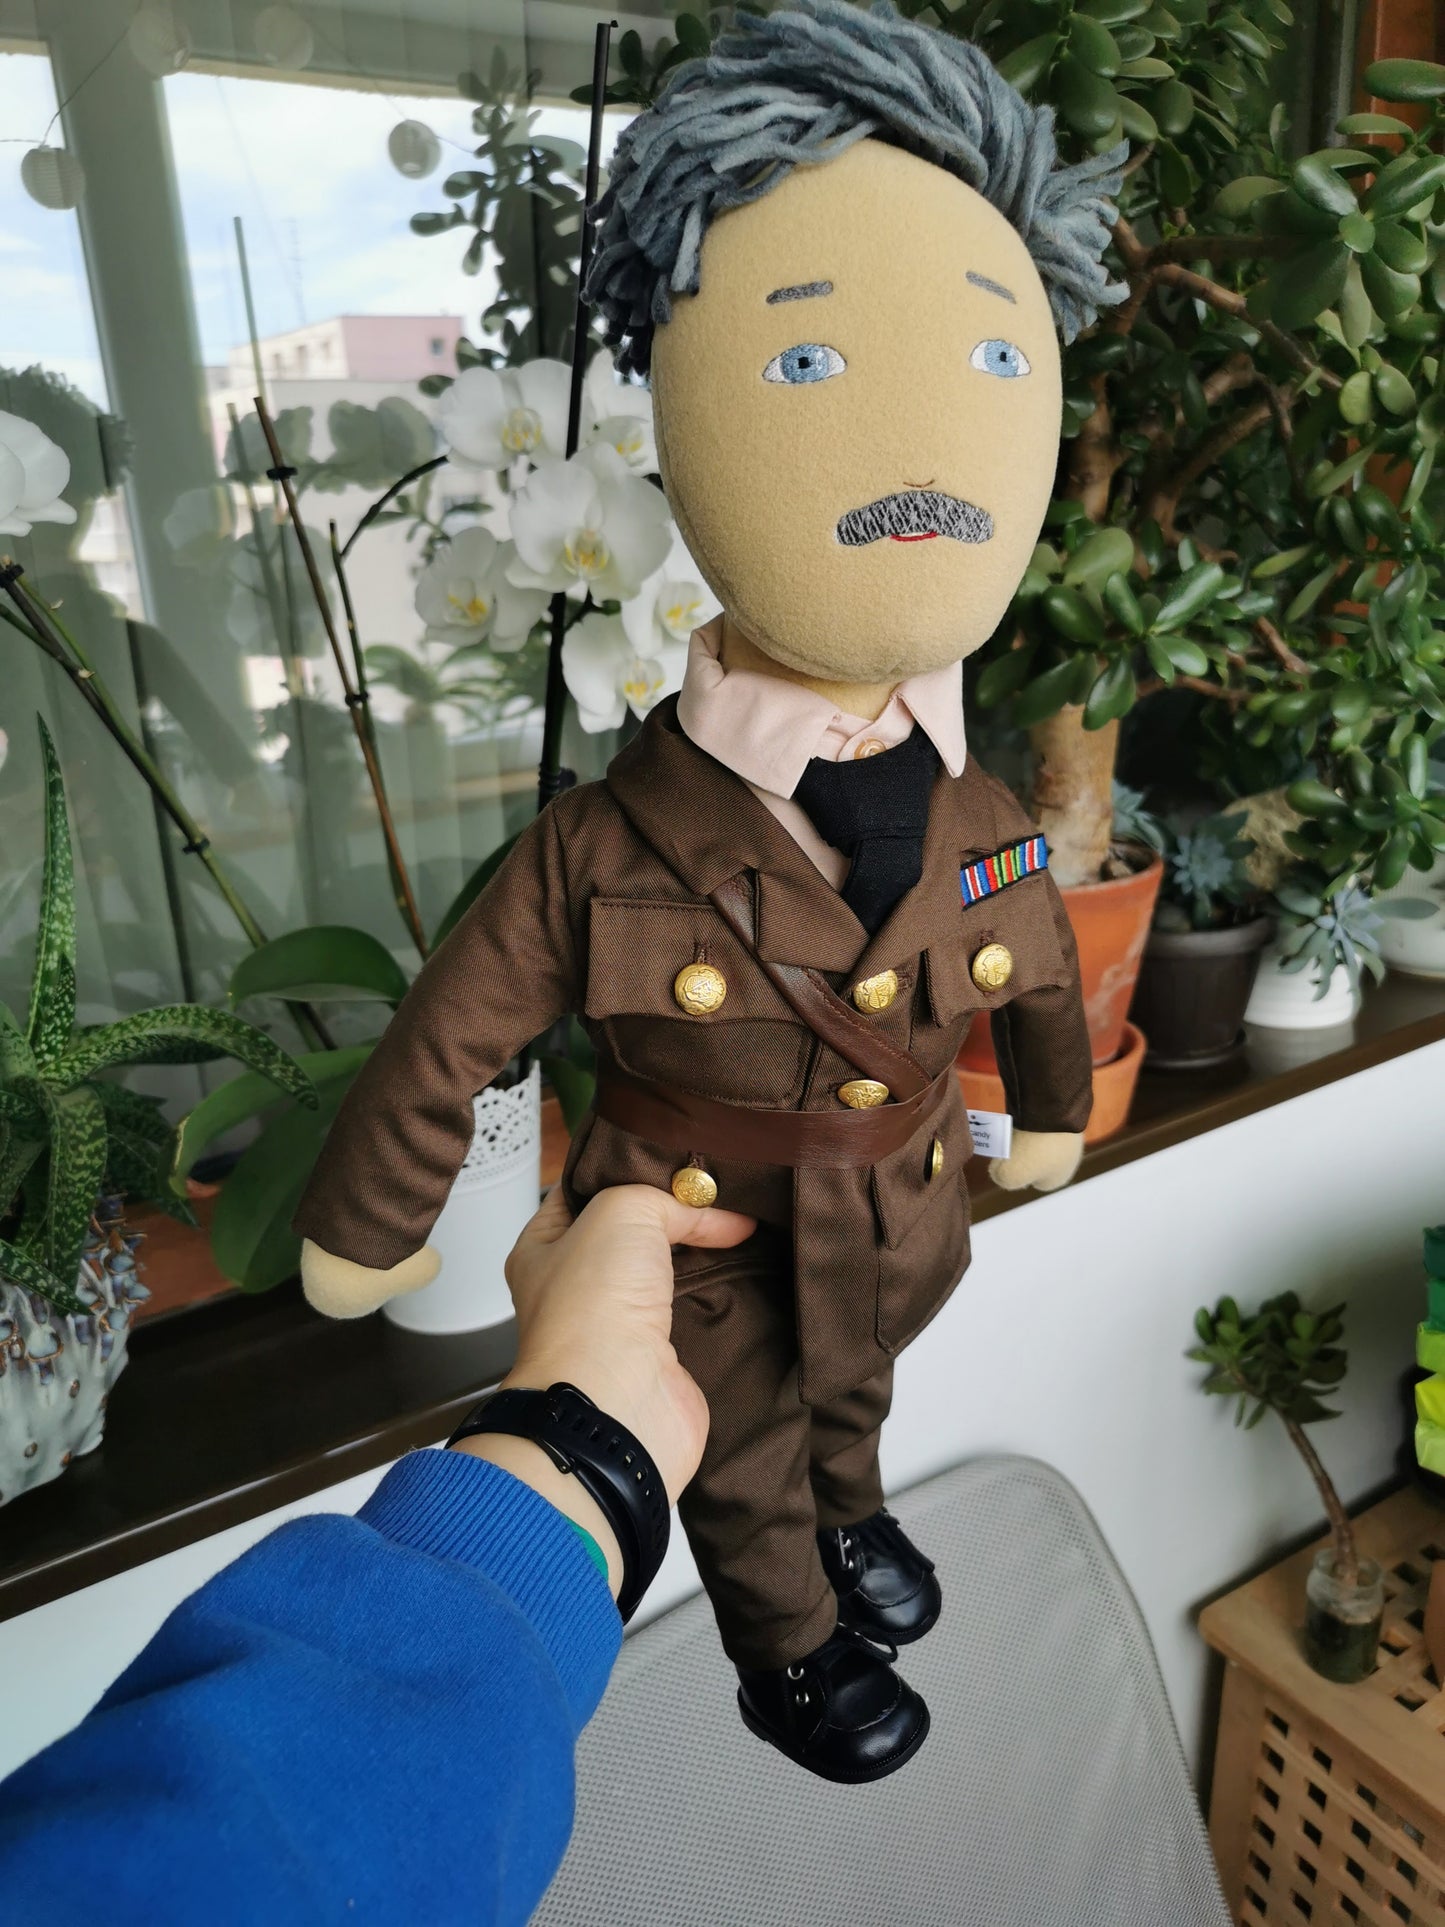 Captain James portrait doll, custom plush doll based on Ghosts BBC series, military doll, mini-me soldier doll